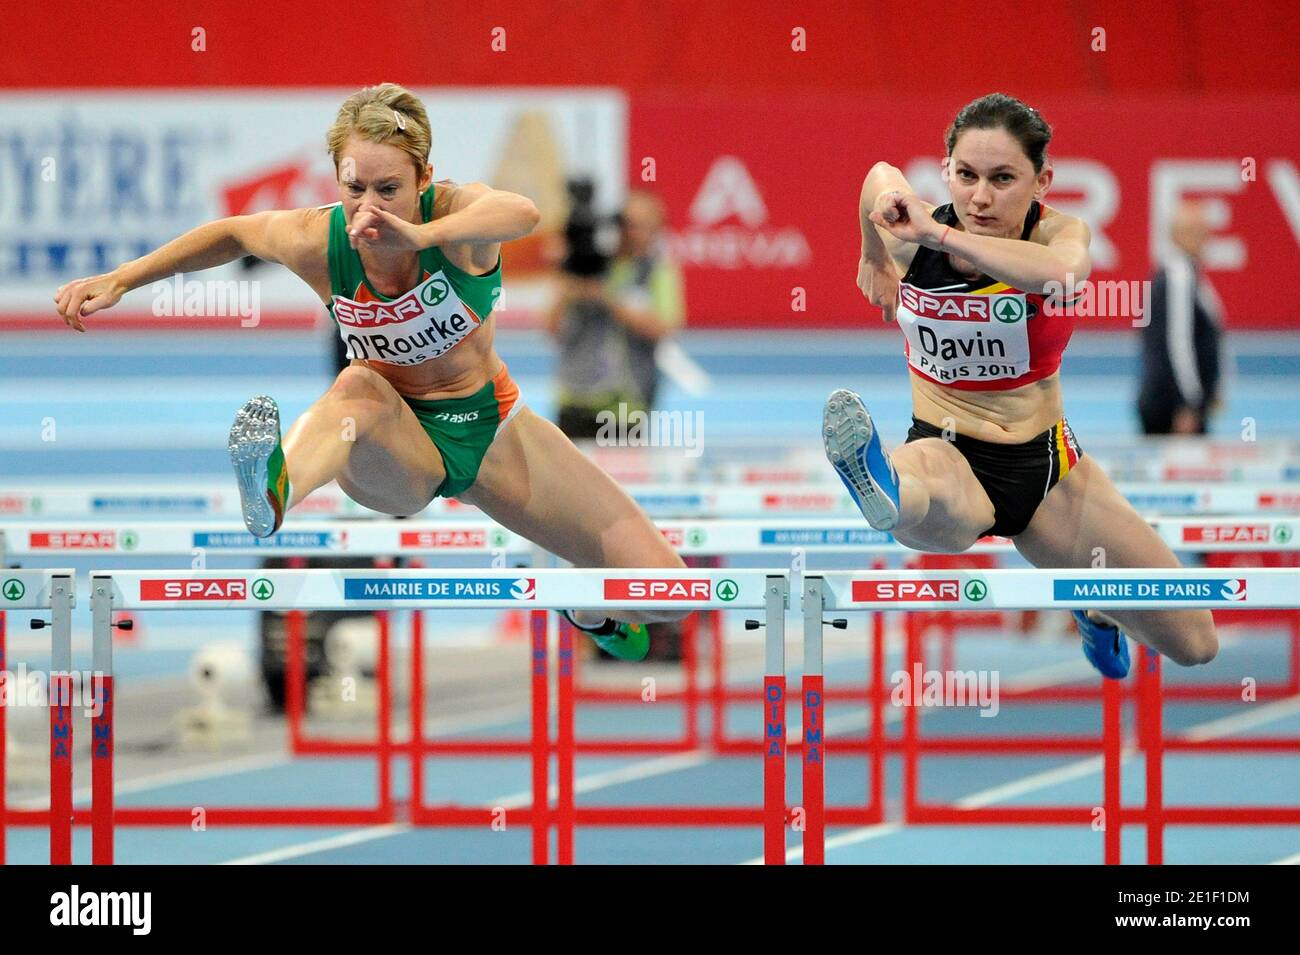 Derval O'Rourke of Ireland and Elisabeth Davin of Belgium compete in the Women's 60m hurdles heat 4 during day 1 of the 31st European Athletics Indoor Championships at the Palais Omnisports de Paris-Bercy in Paris, France on March 4, 2011. Photo by Stephane Reix/ABACAPRESS.COM. Stock Photo